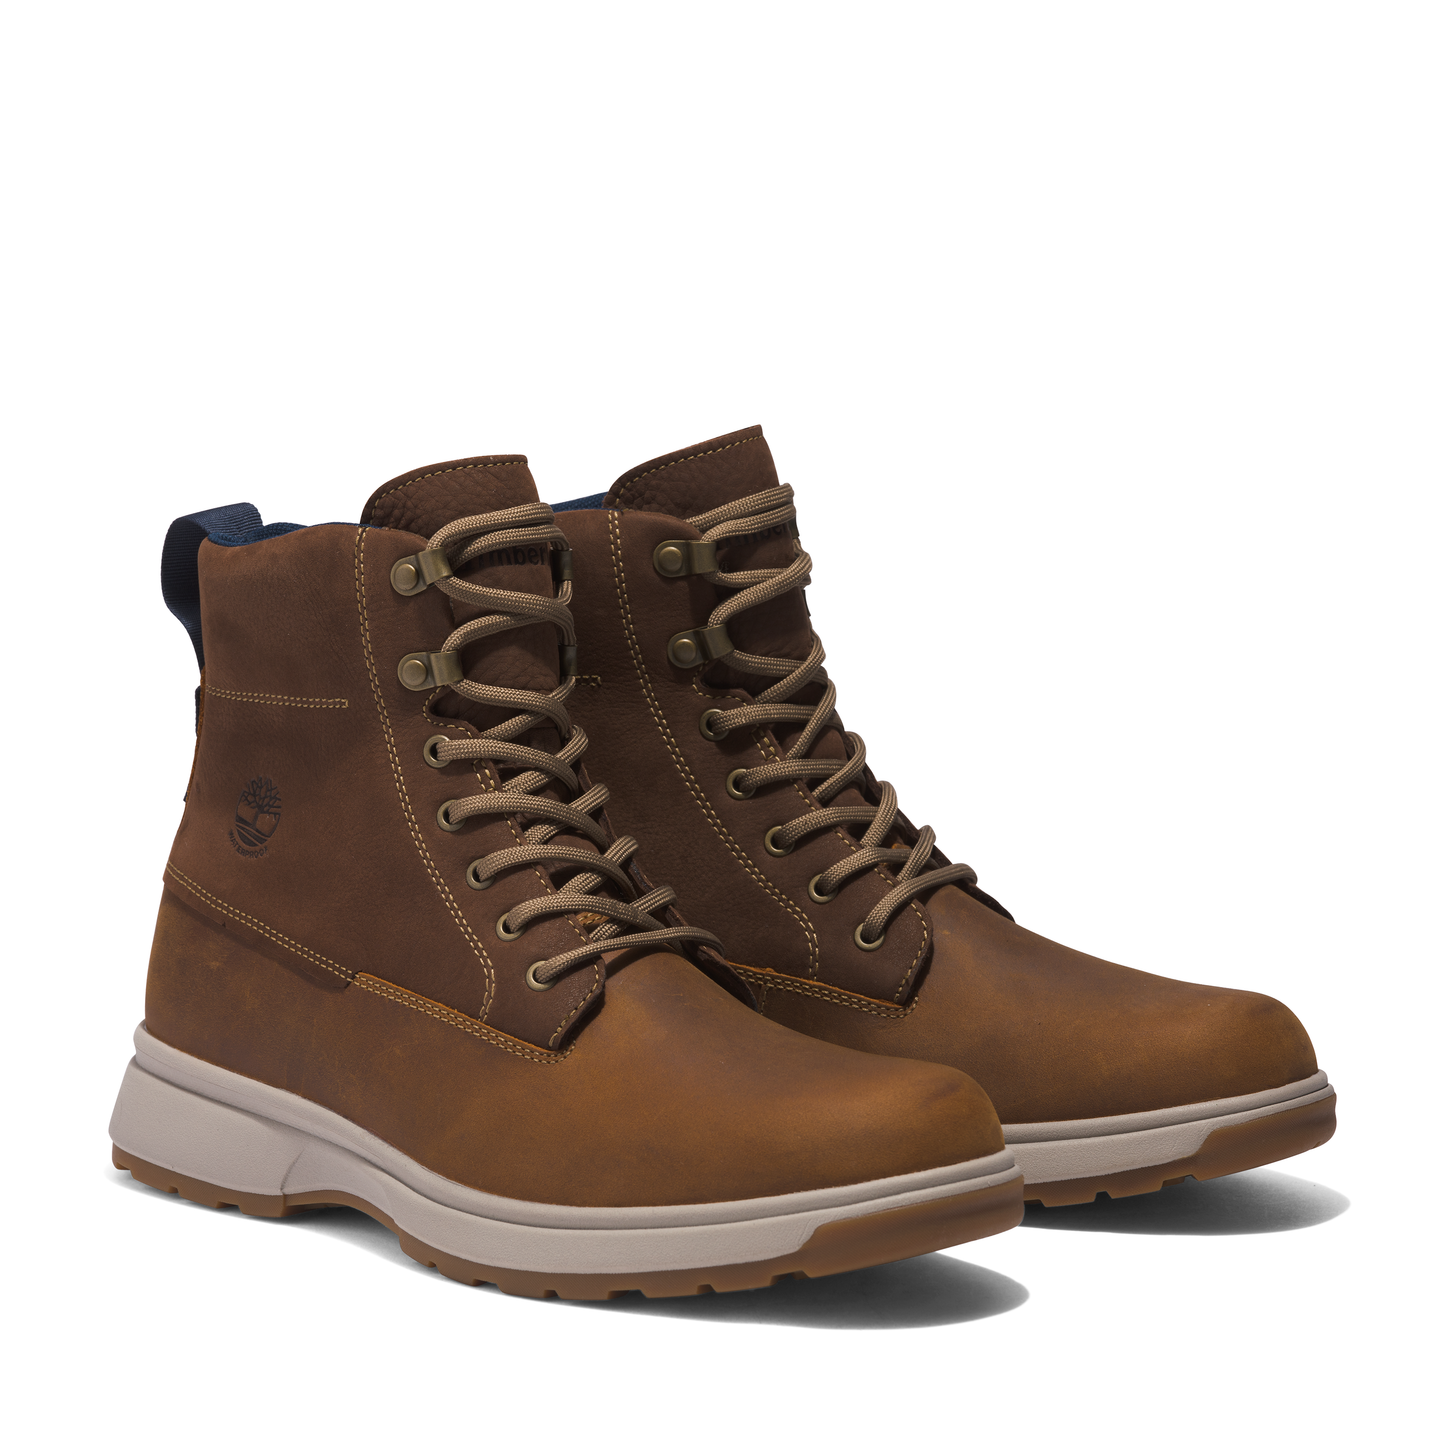 Botas Timberland Atwells Ave Waterproof Cafés | Outdor Adventure Colombia